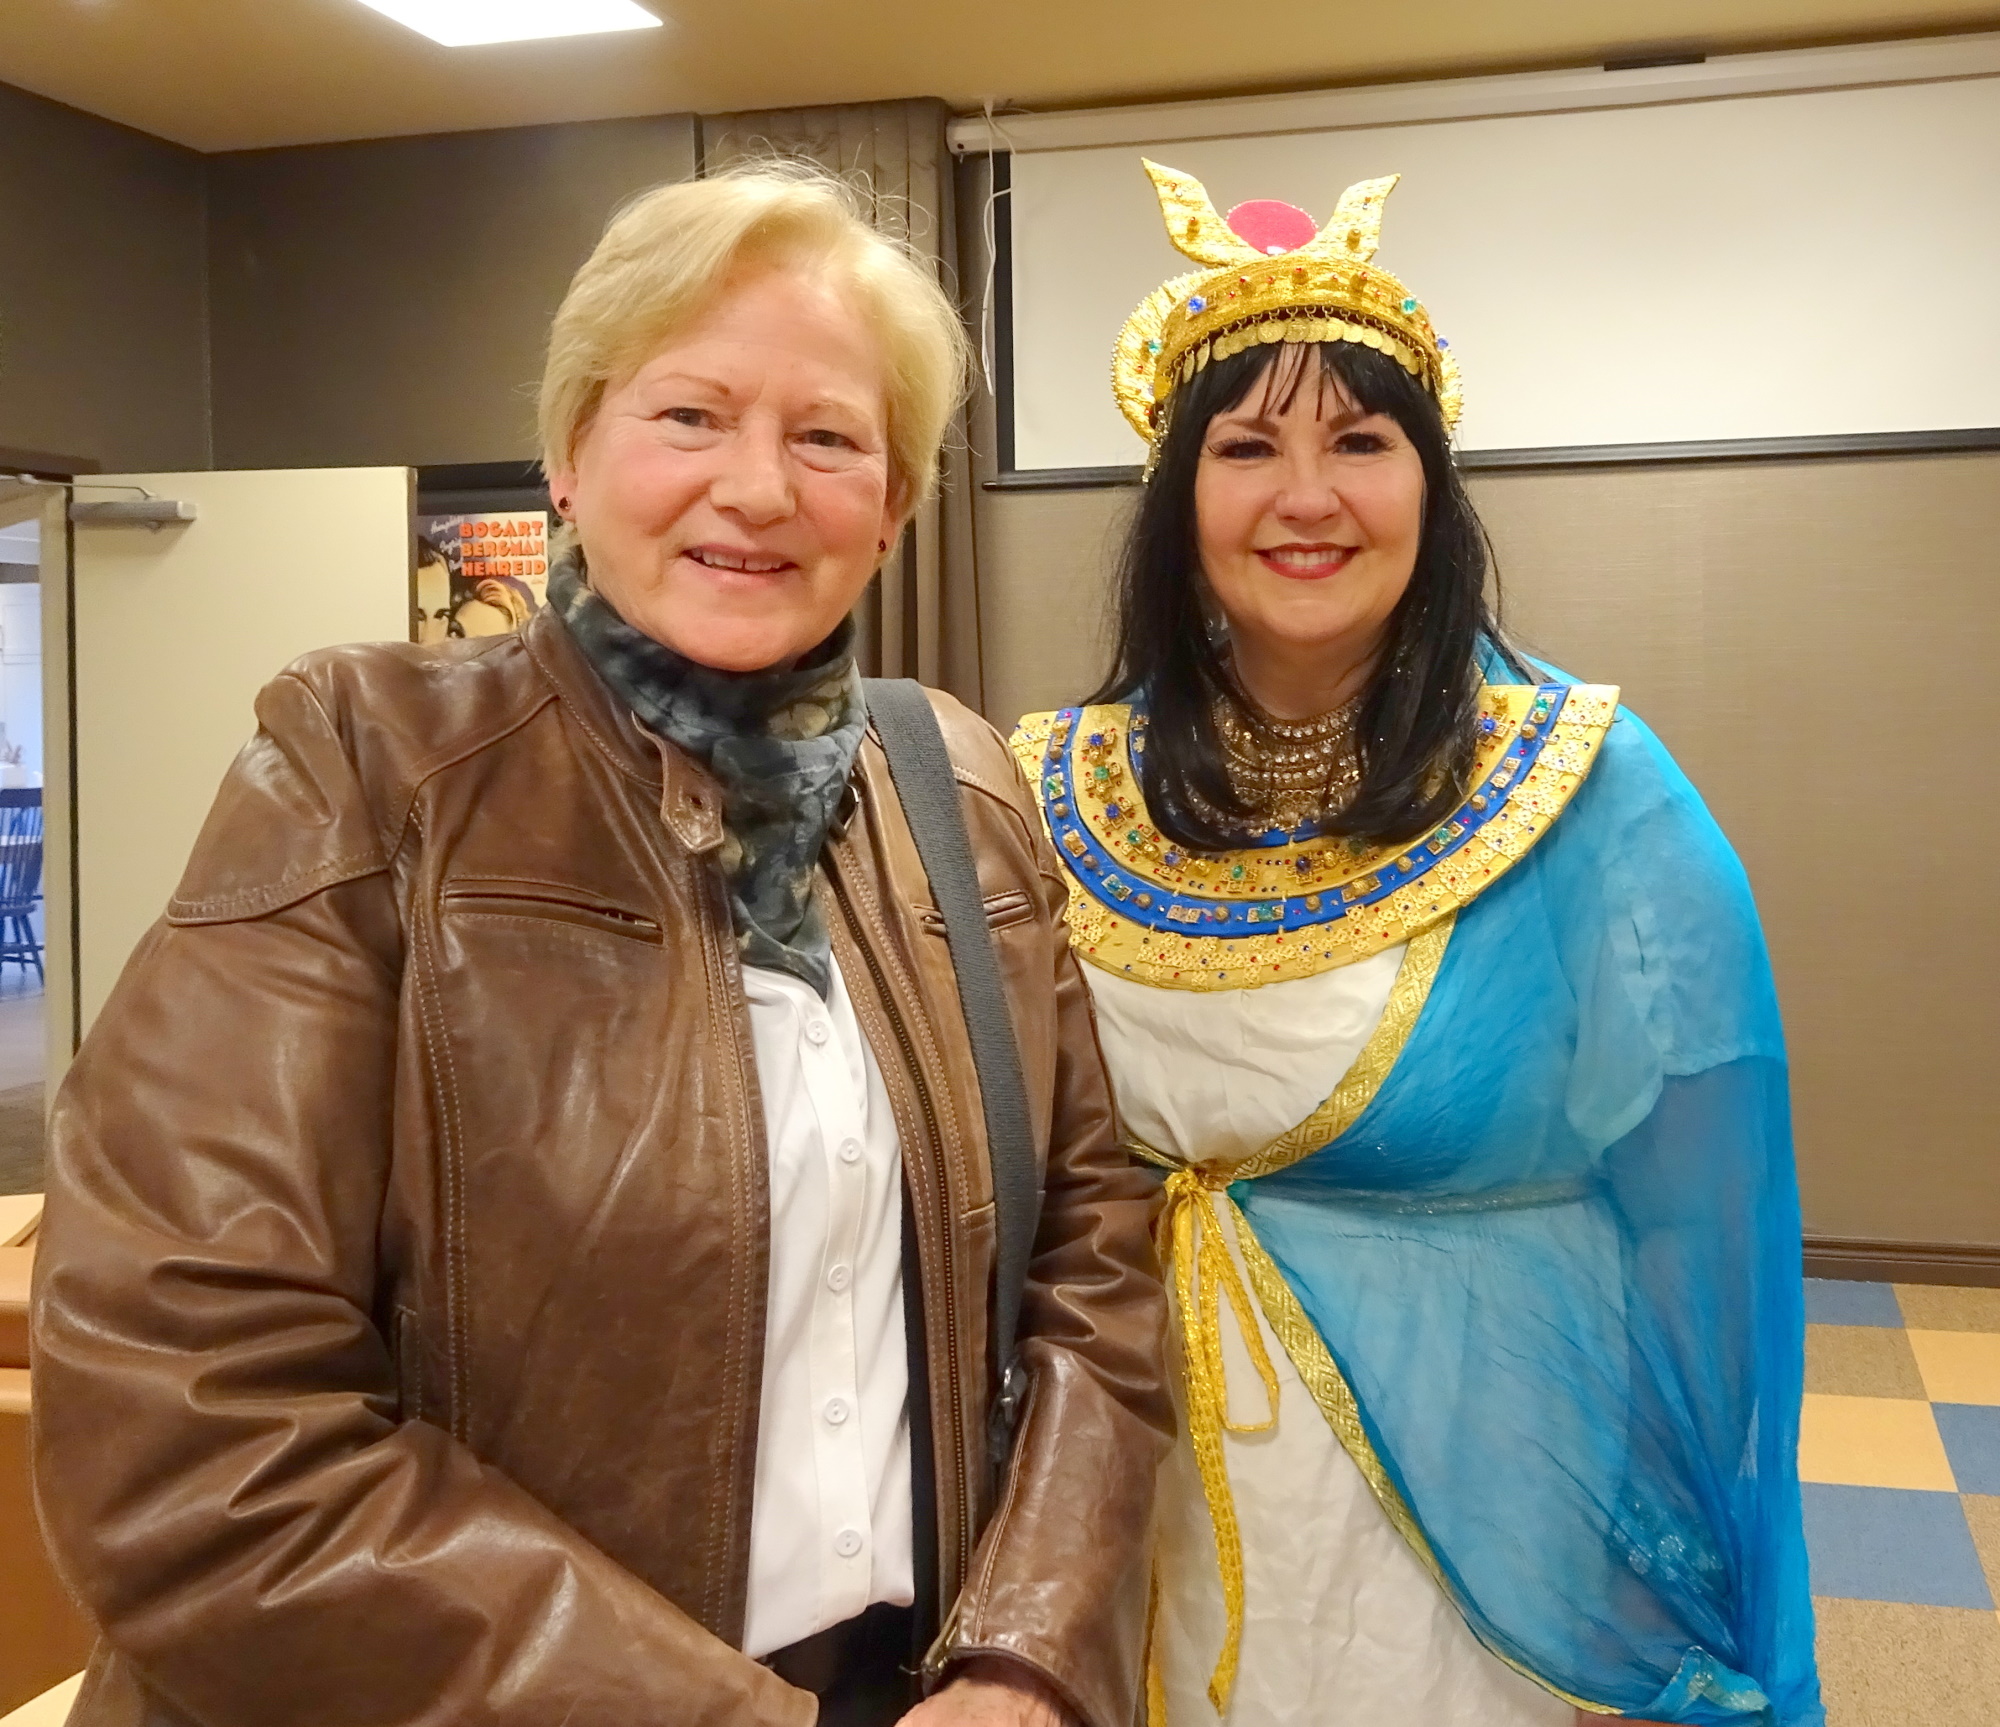 Attendee Judy with Lianne Harris, Ancient Egypt Presentation at VIVA 24 Feb 2020